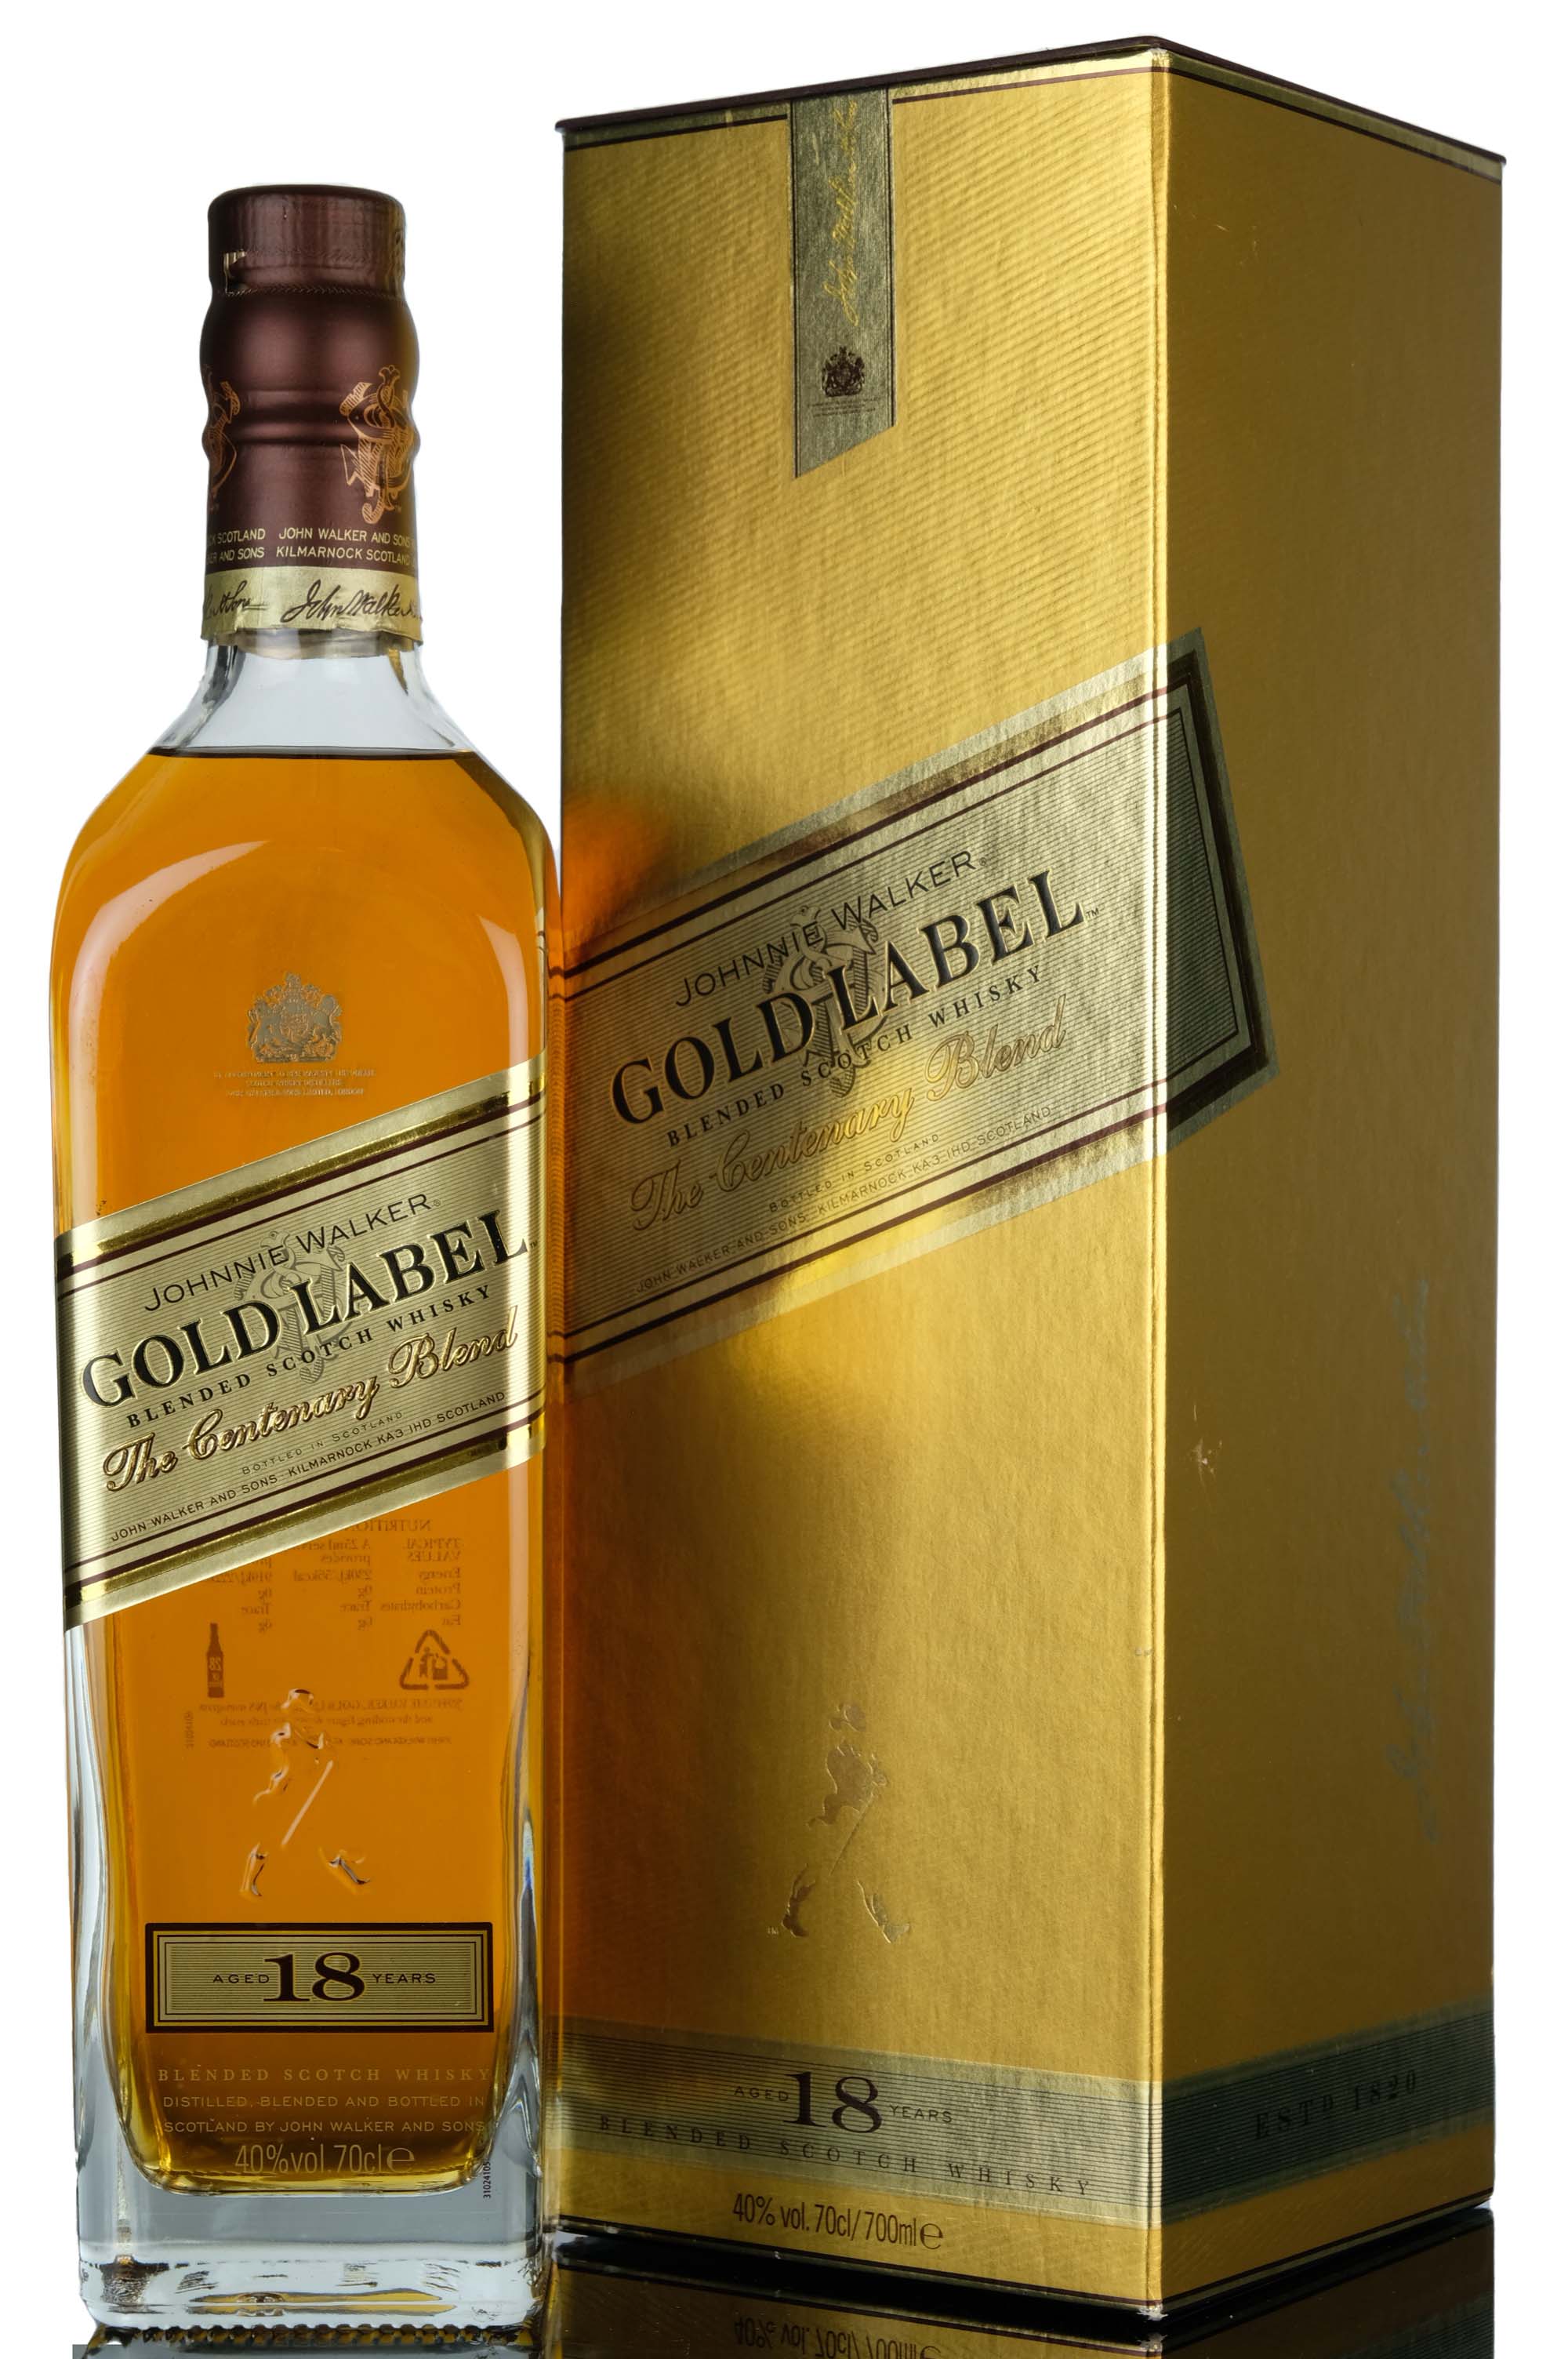 Johnnie Walker 18 Year Old - Gold Label - The Centenary Blend